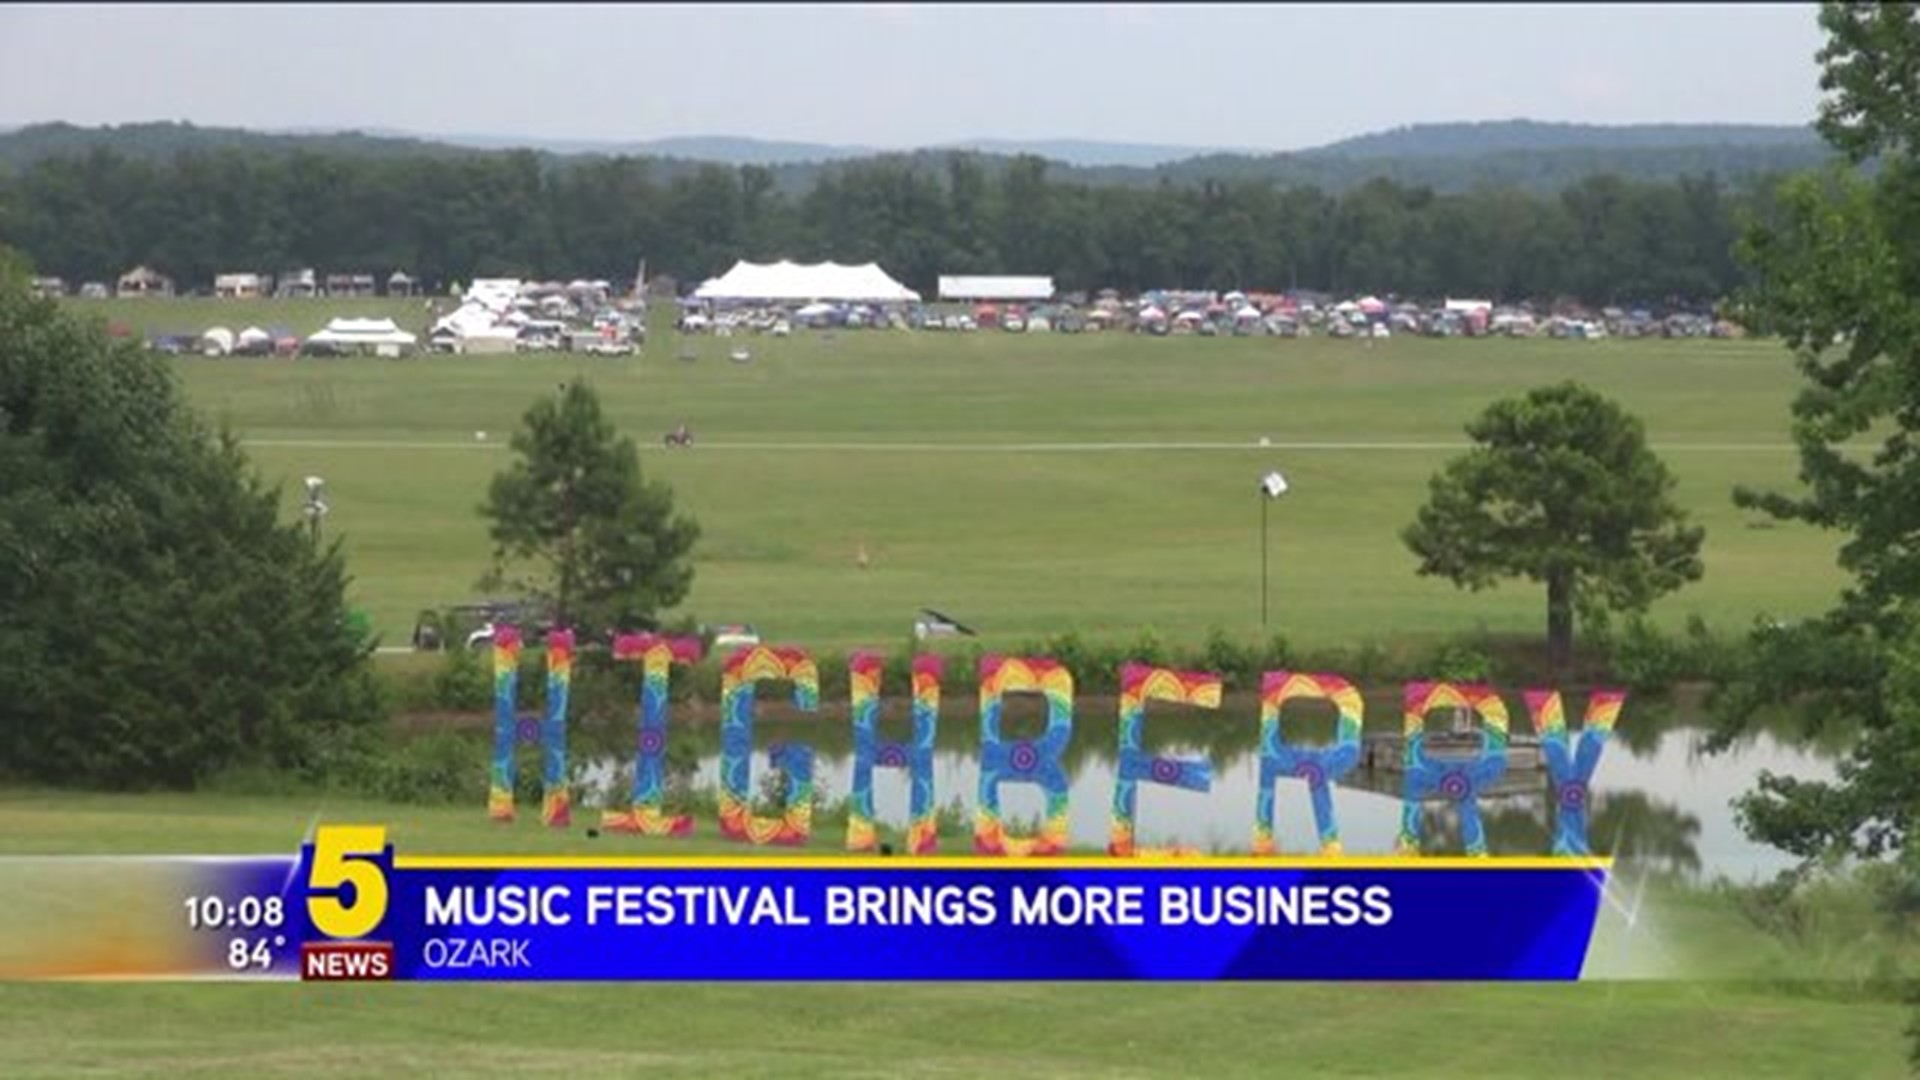 HIGHBERRY MUSIC FESTIVAL BRINGS MORE BUSINESS